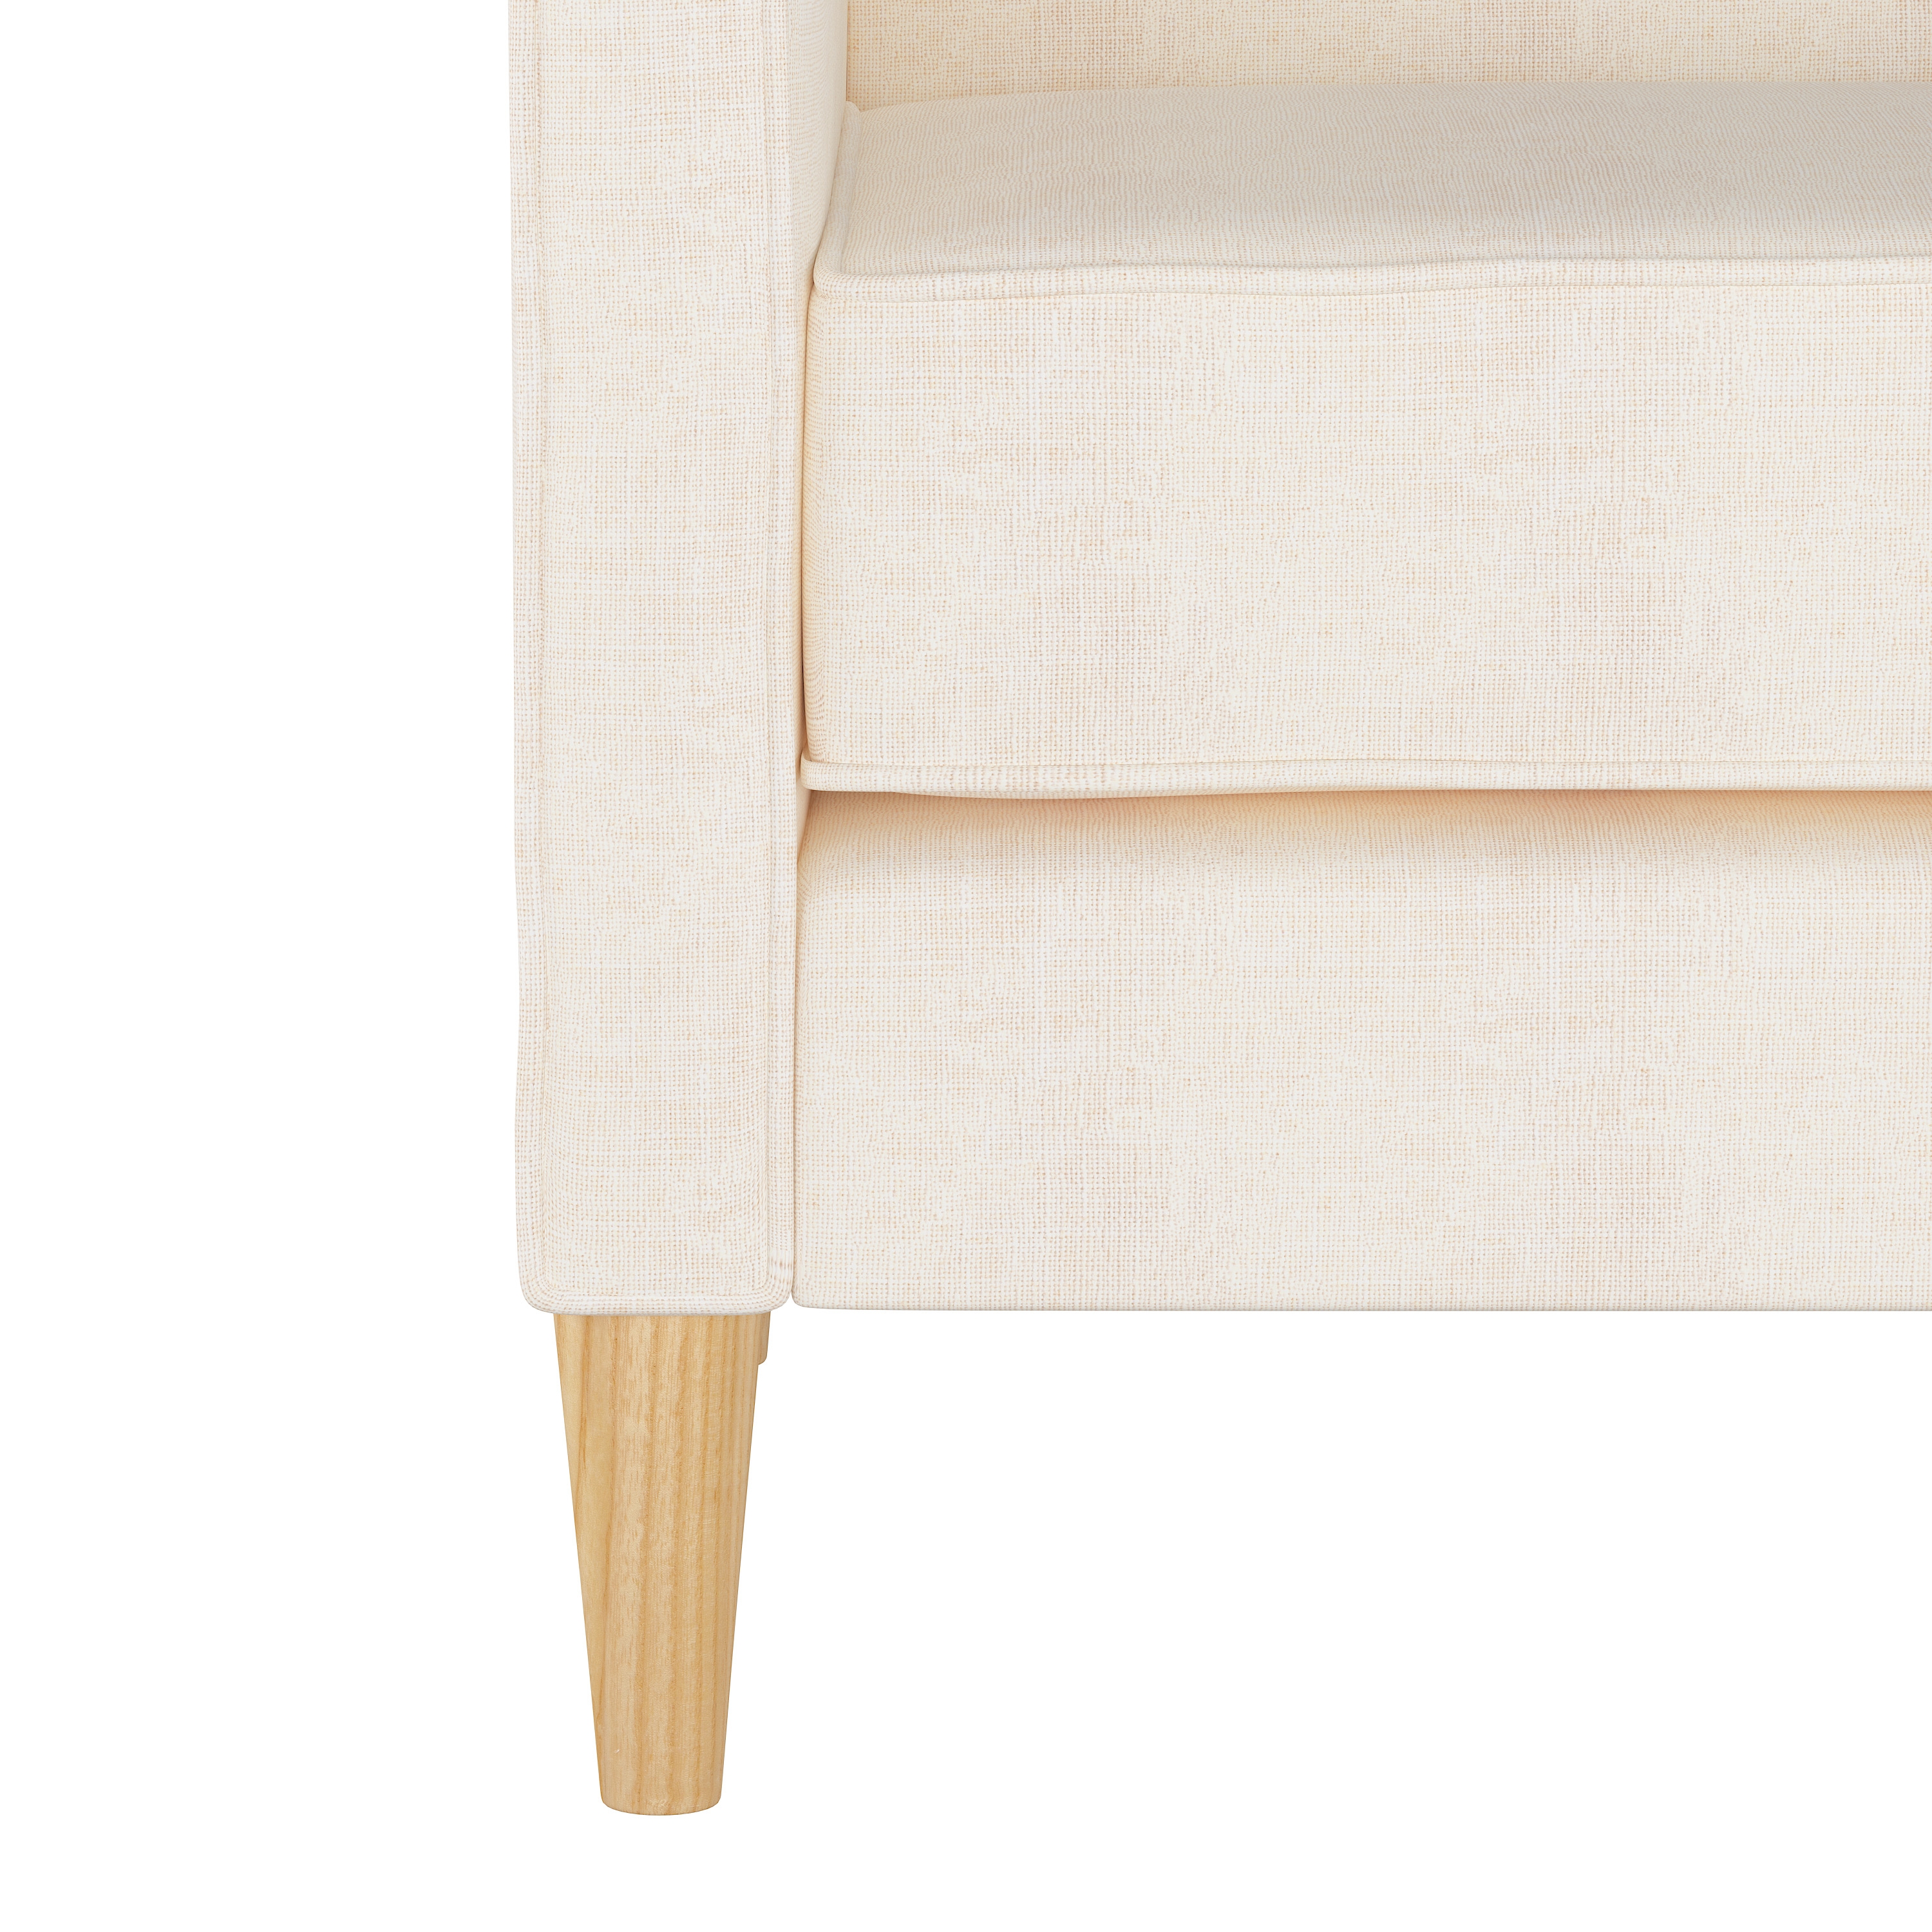 Downing Settee, White - DNU - Image 4